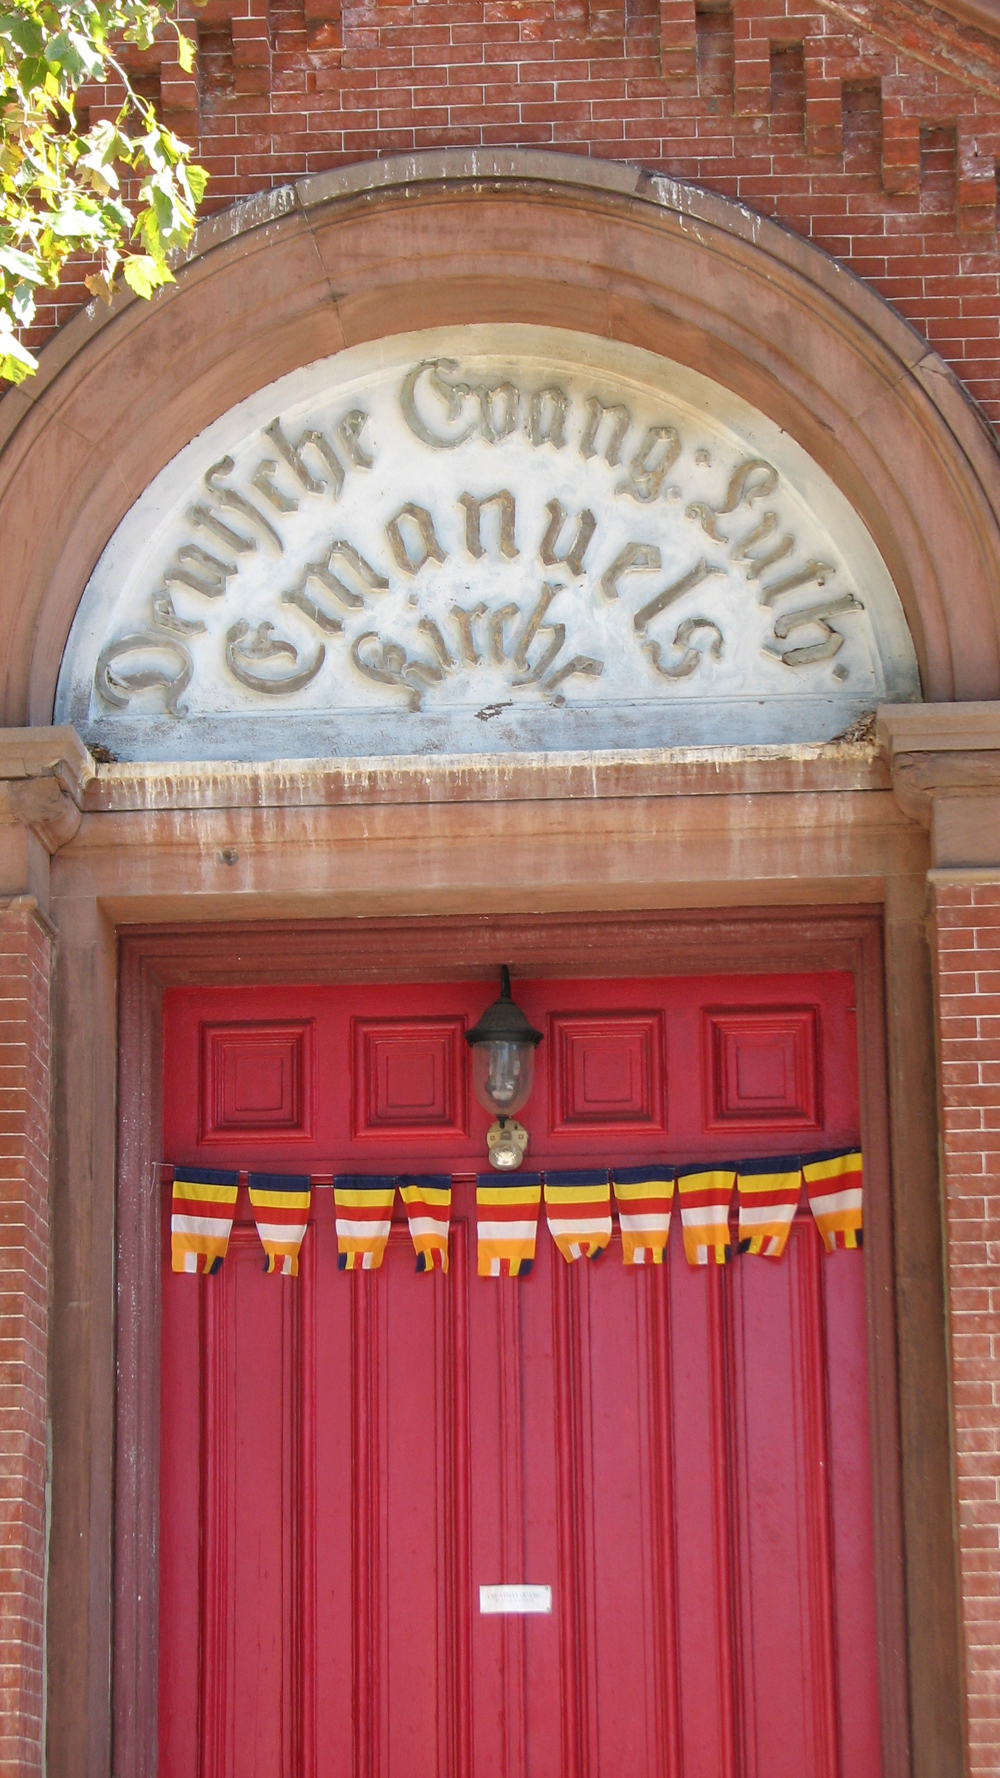 Flags of the new congregation now hang below the original German inscription on the building entrance.